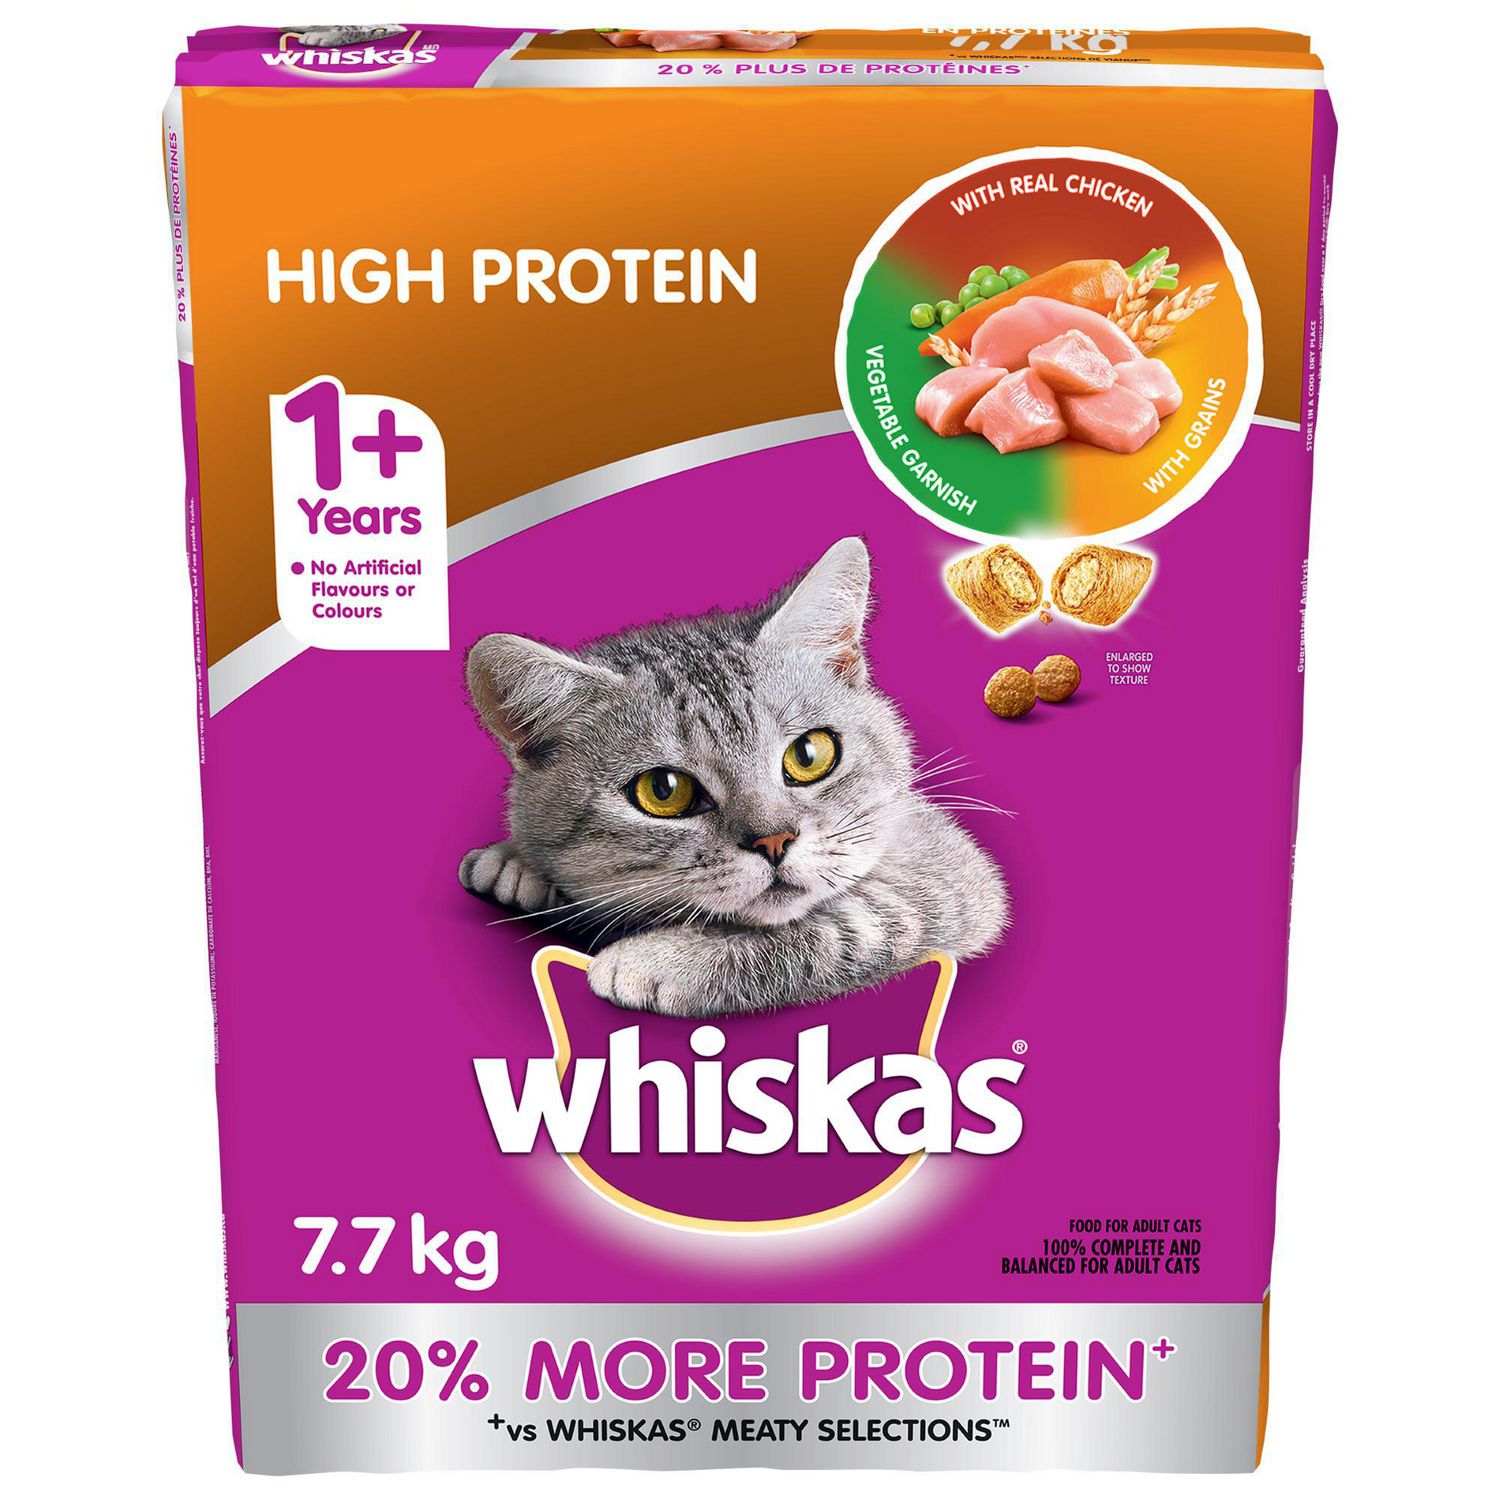 WHISKAS Dry Cat Food High Protein With Real Chicken, 7.7 kg, Bag